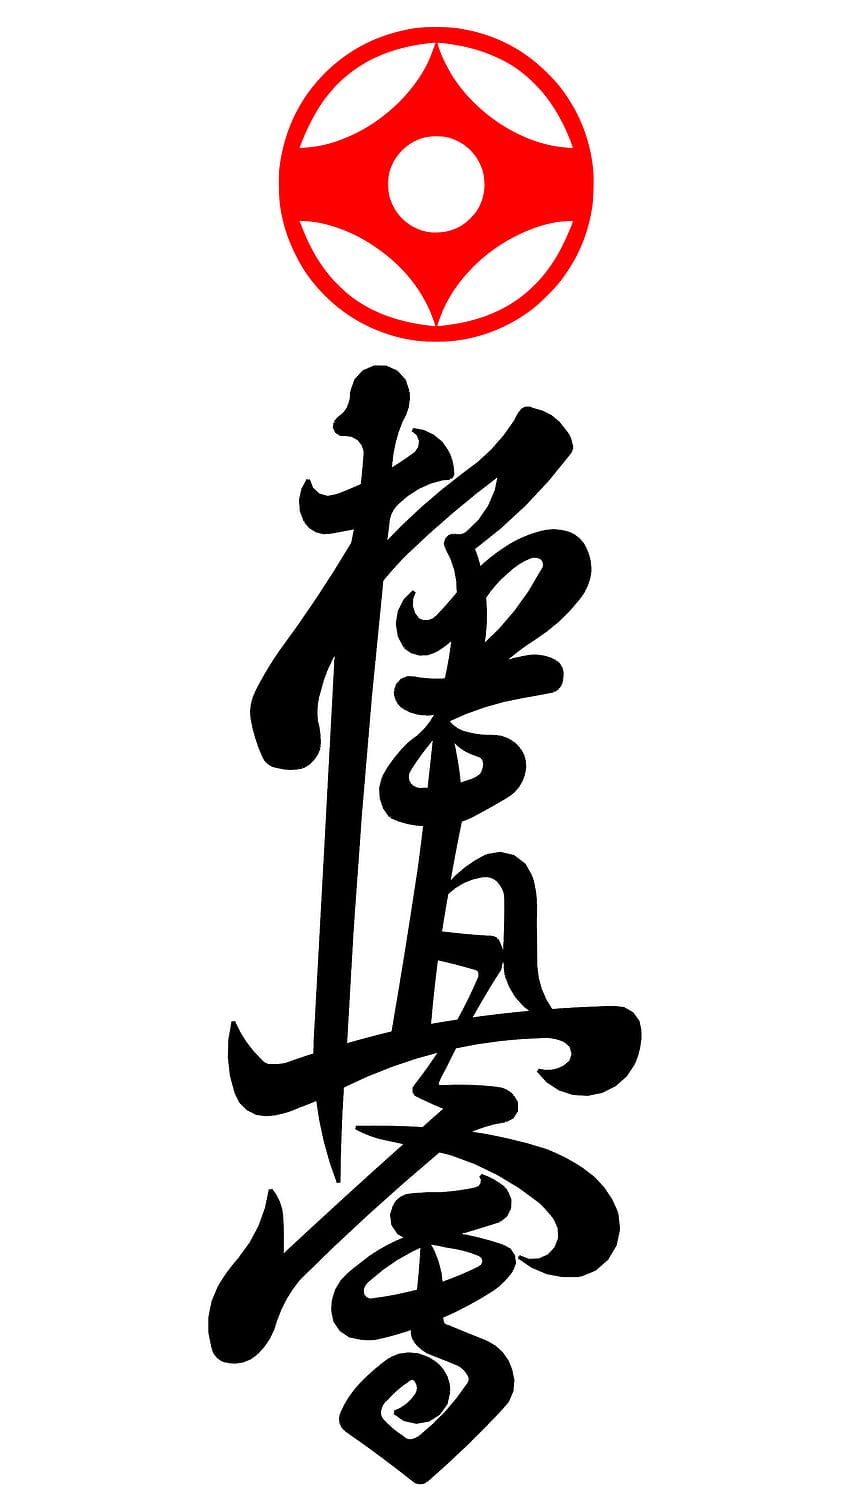 Looking for a kyokushin karate kanji for iPhone (resize or original): Requests HD phone wallpaper